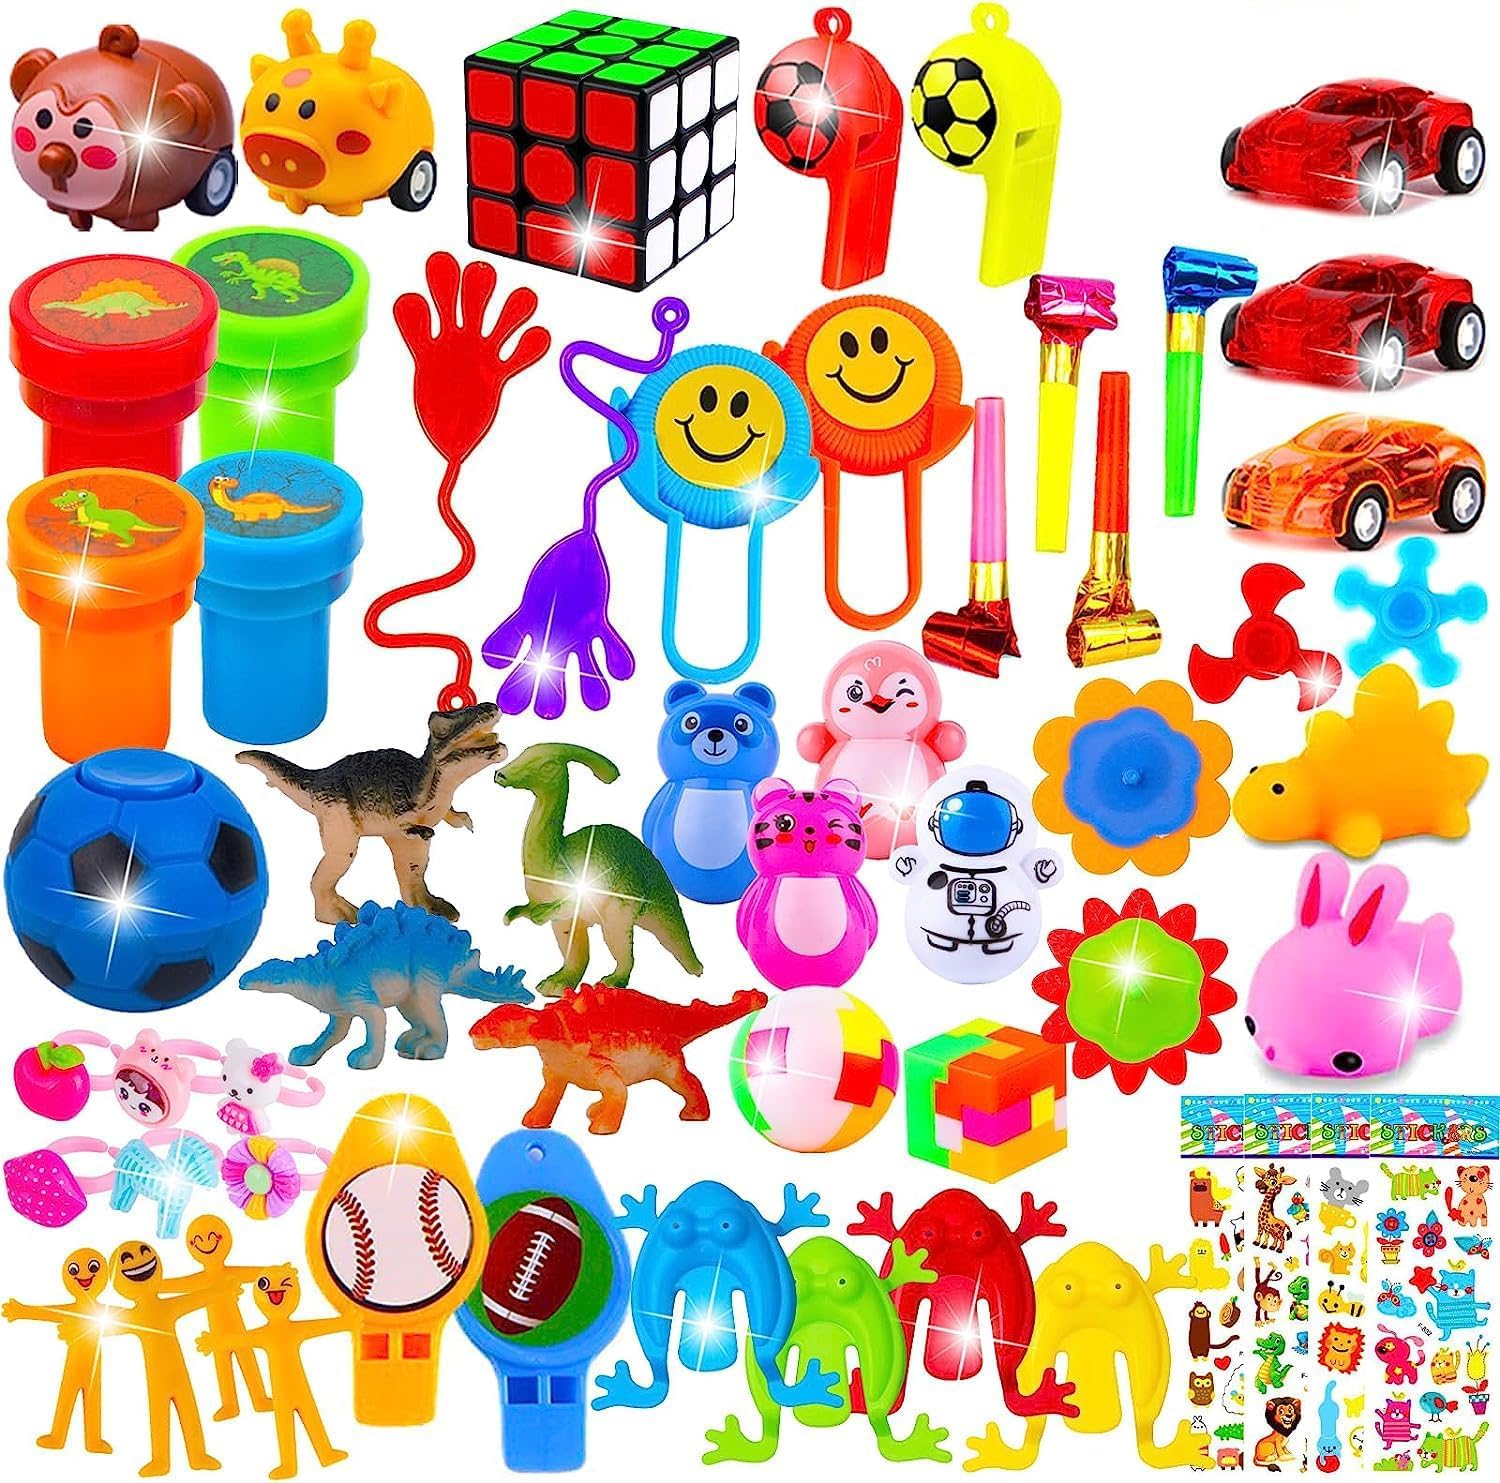 Party Bag Fillers for Kids - Kids Party Favors Pack Goodie Bags Stocking Fillers - Assorted Toys Gift Presents for Boys Girls Birthday Game Prizes Classroom Rewards